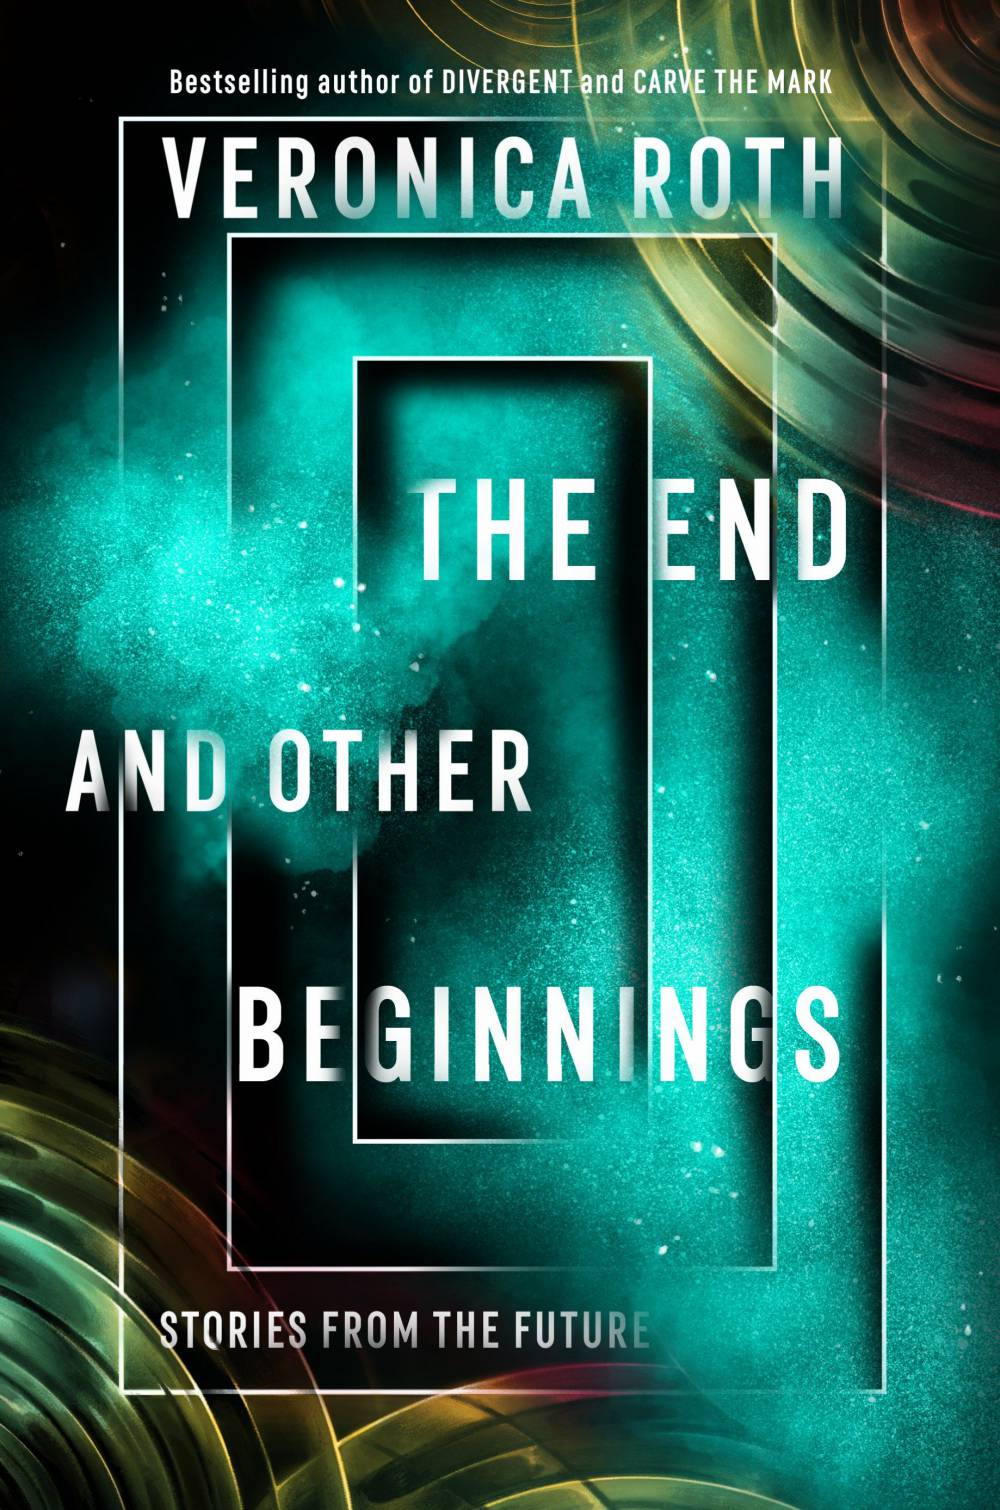 'The End and Other Beginnings: Stories from the Future' by Veronica Roth